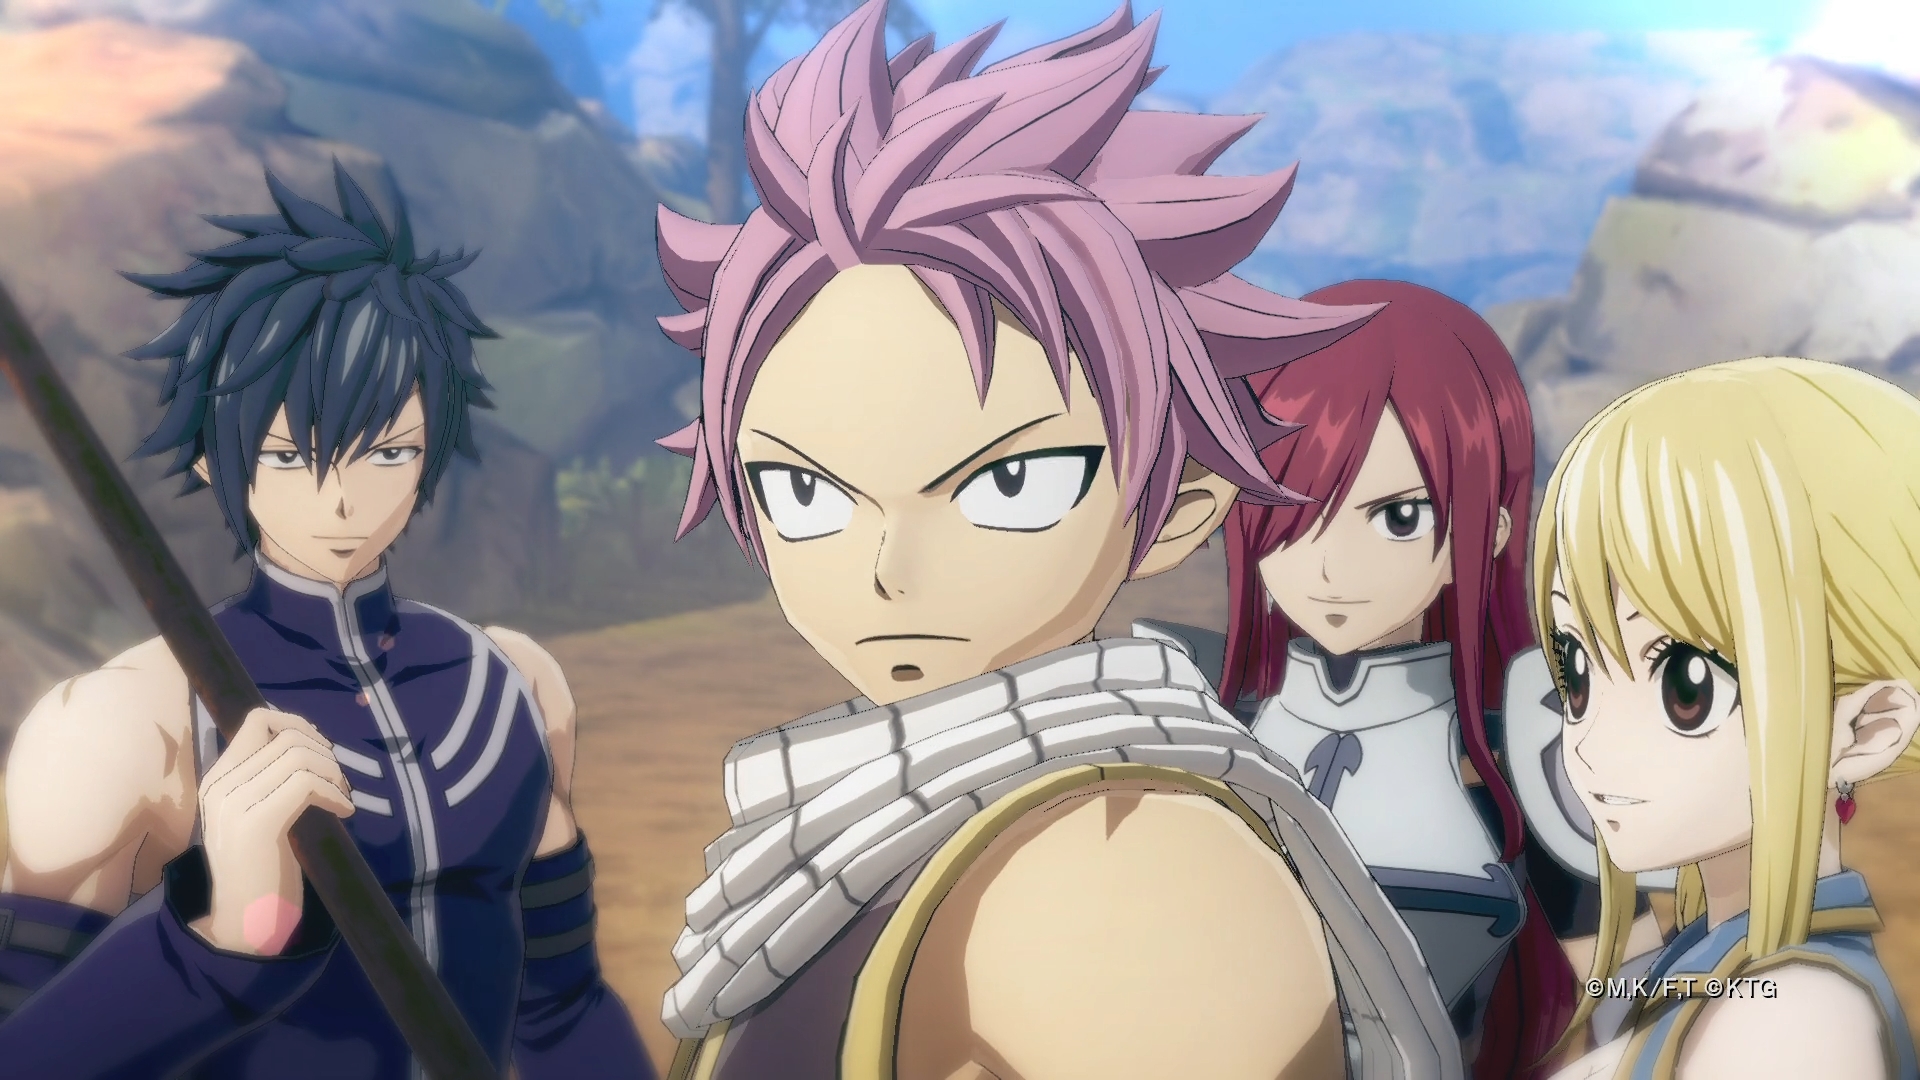 fairy tail game on switch